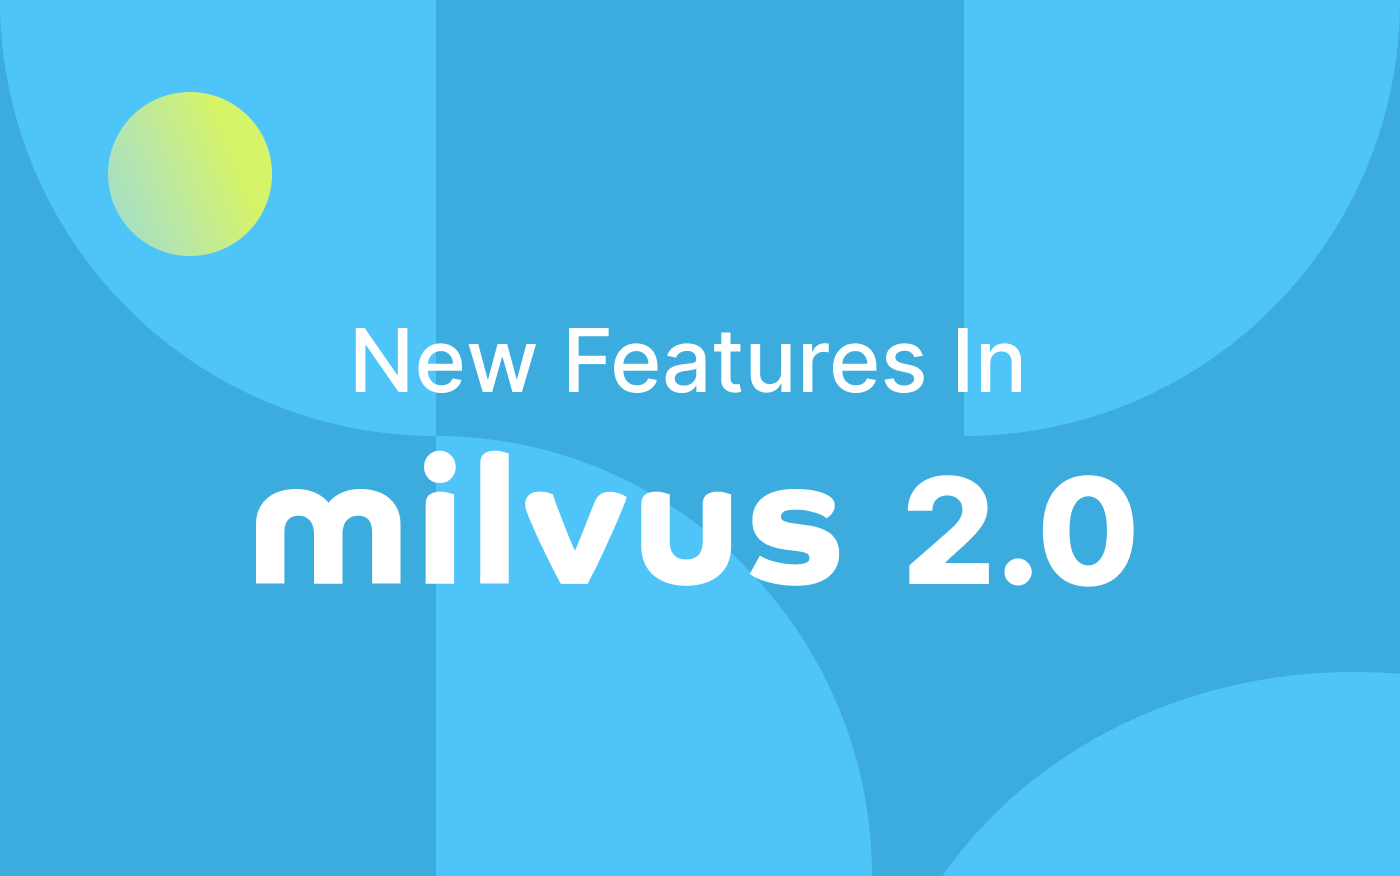 Milvus 2.0 - A Glimpse at New Features